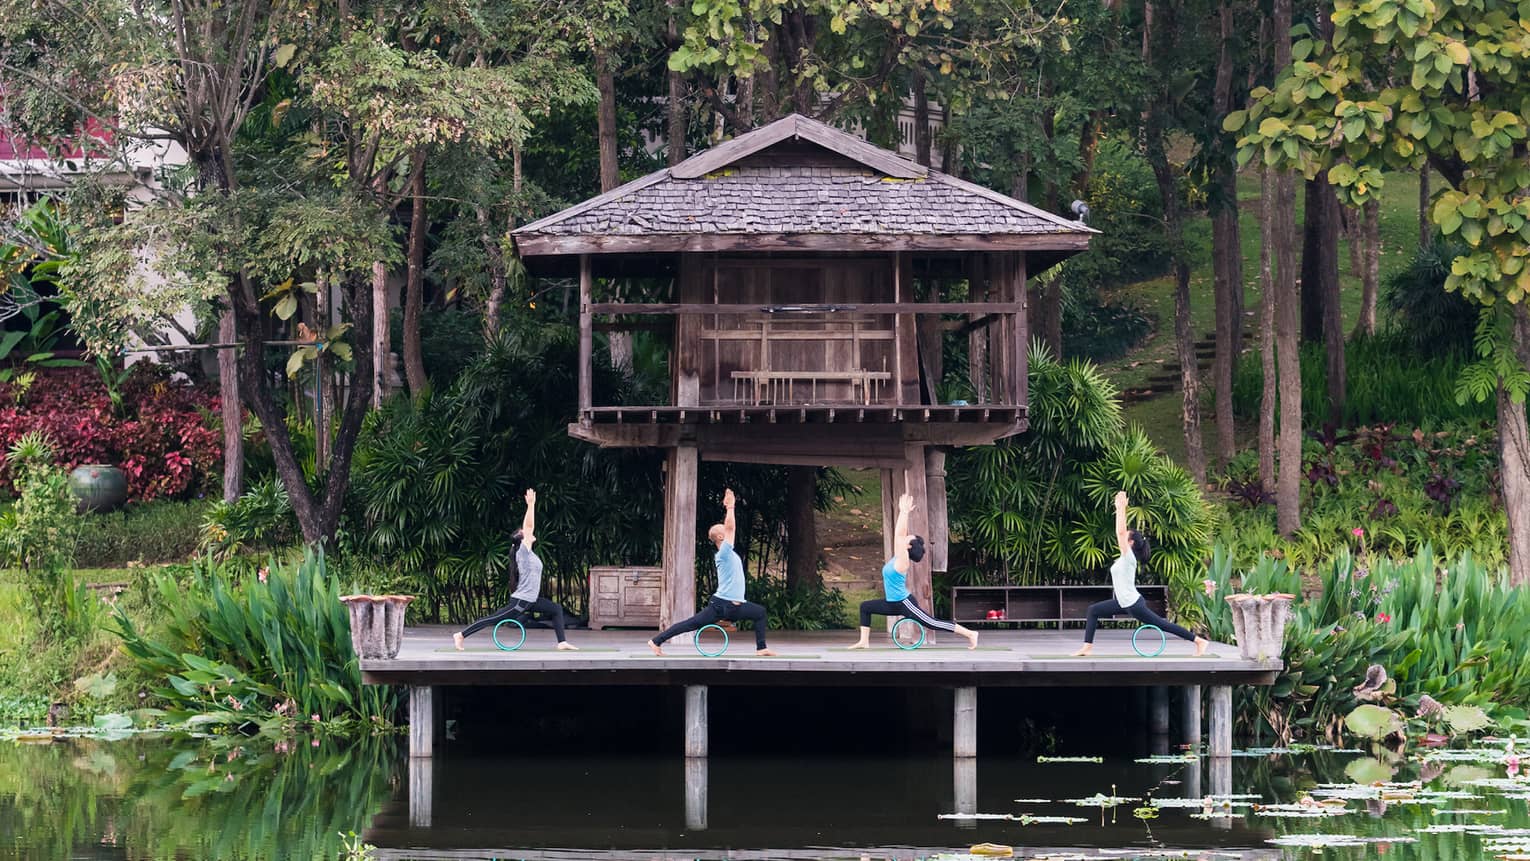 Four people doing yoga on a deck overlooking a calm pond, in front of a wooden bungalow and jungle trees